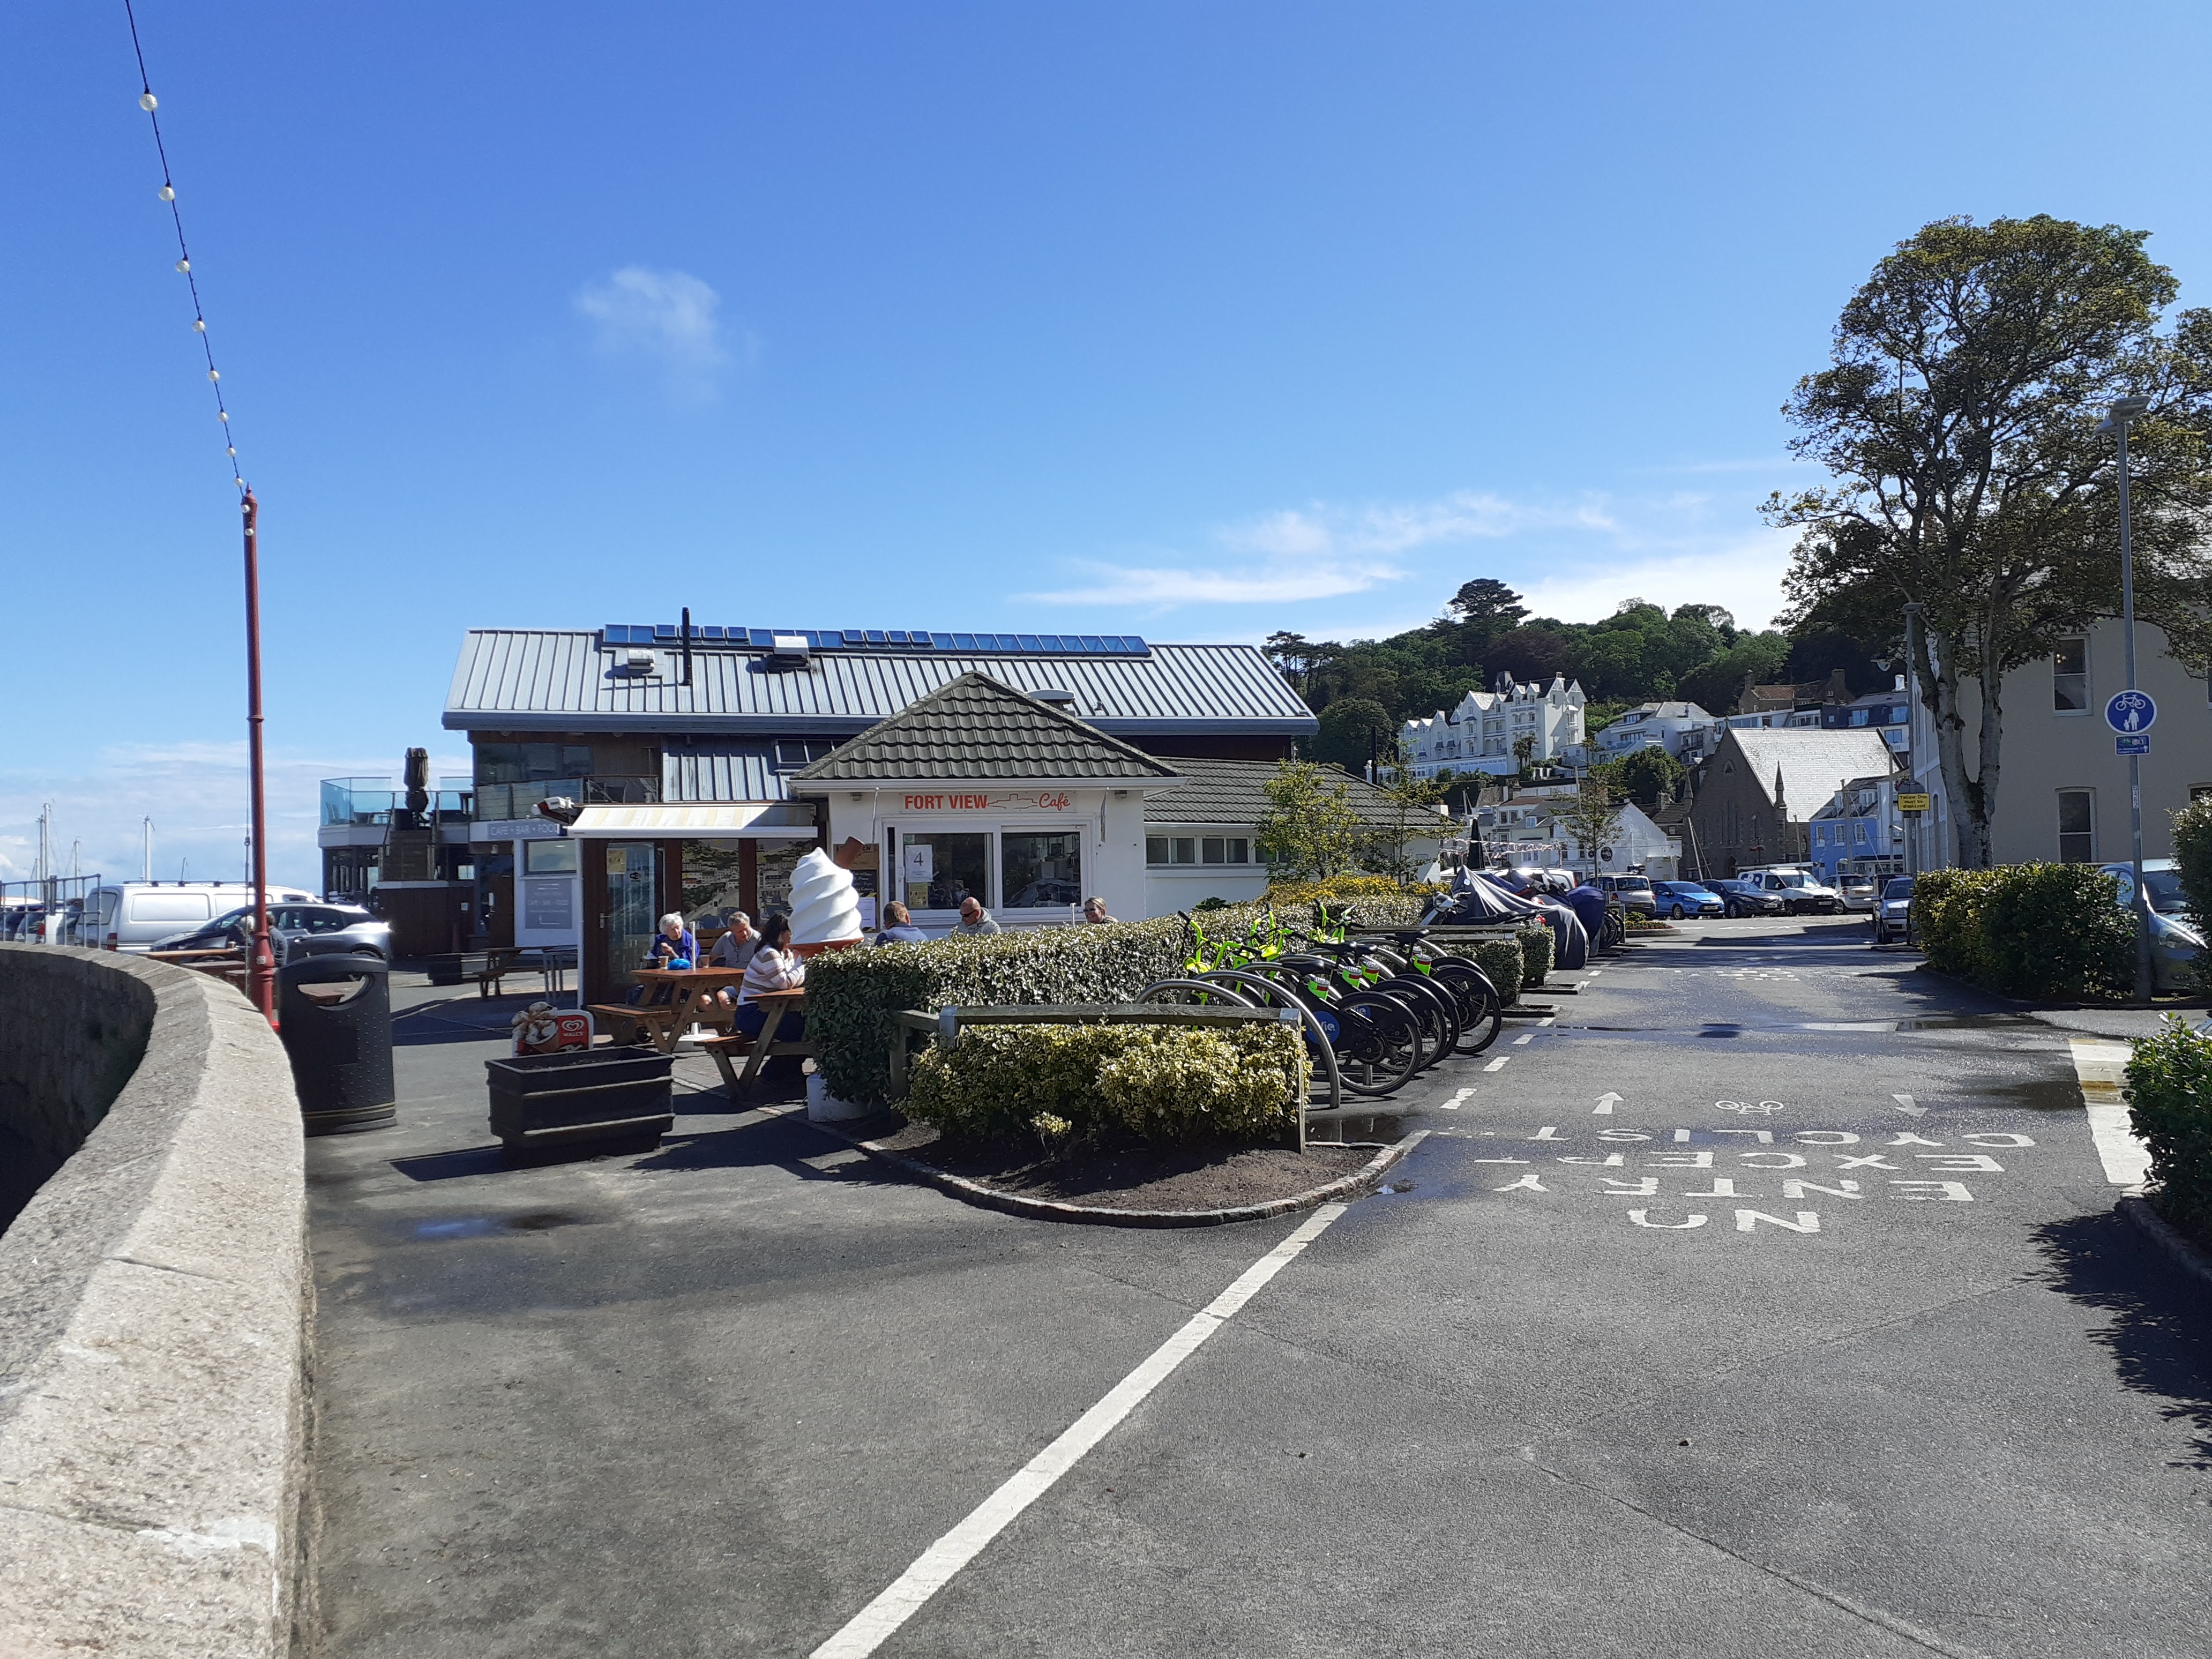 Fort View Cafe